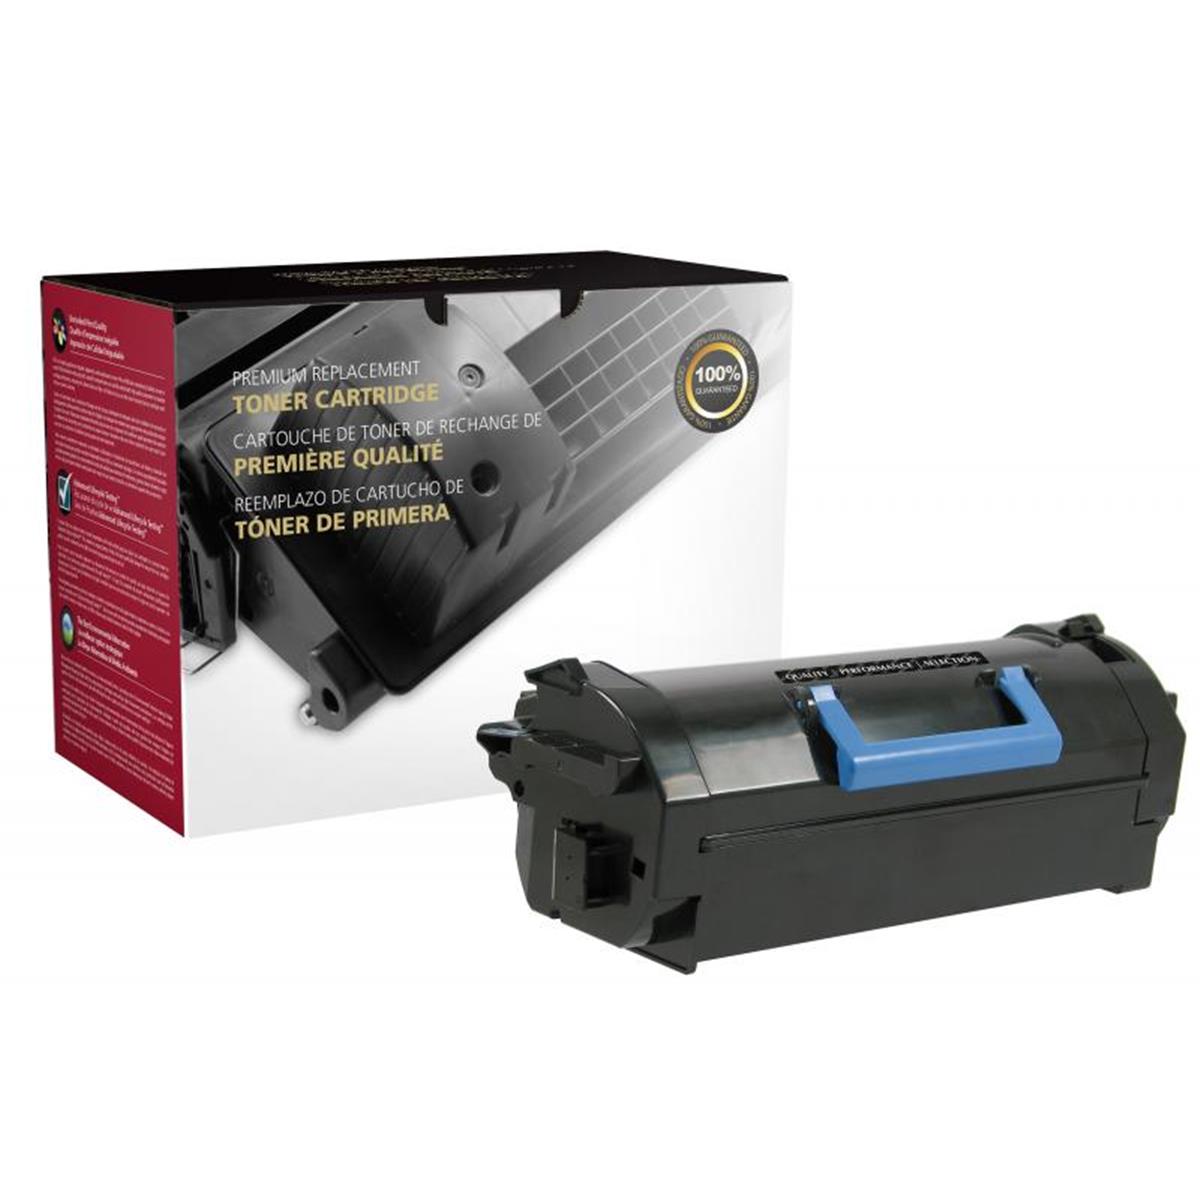 Picture of Dell 200718 Extra High Yield Toner Cartridge for Dell B5460